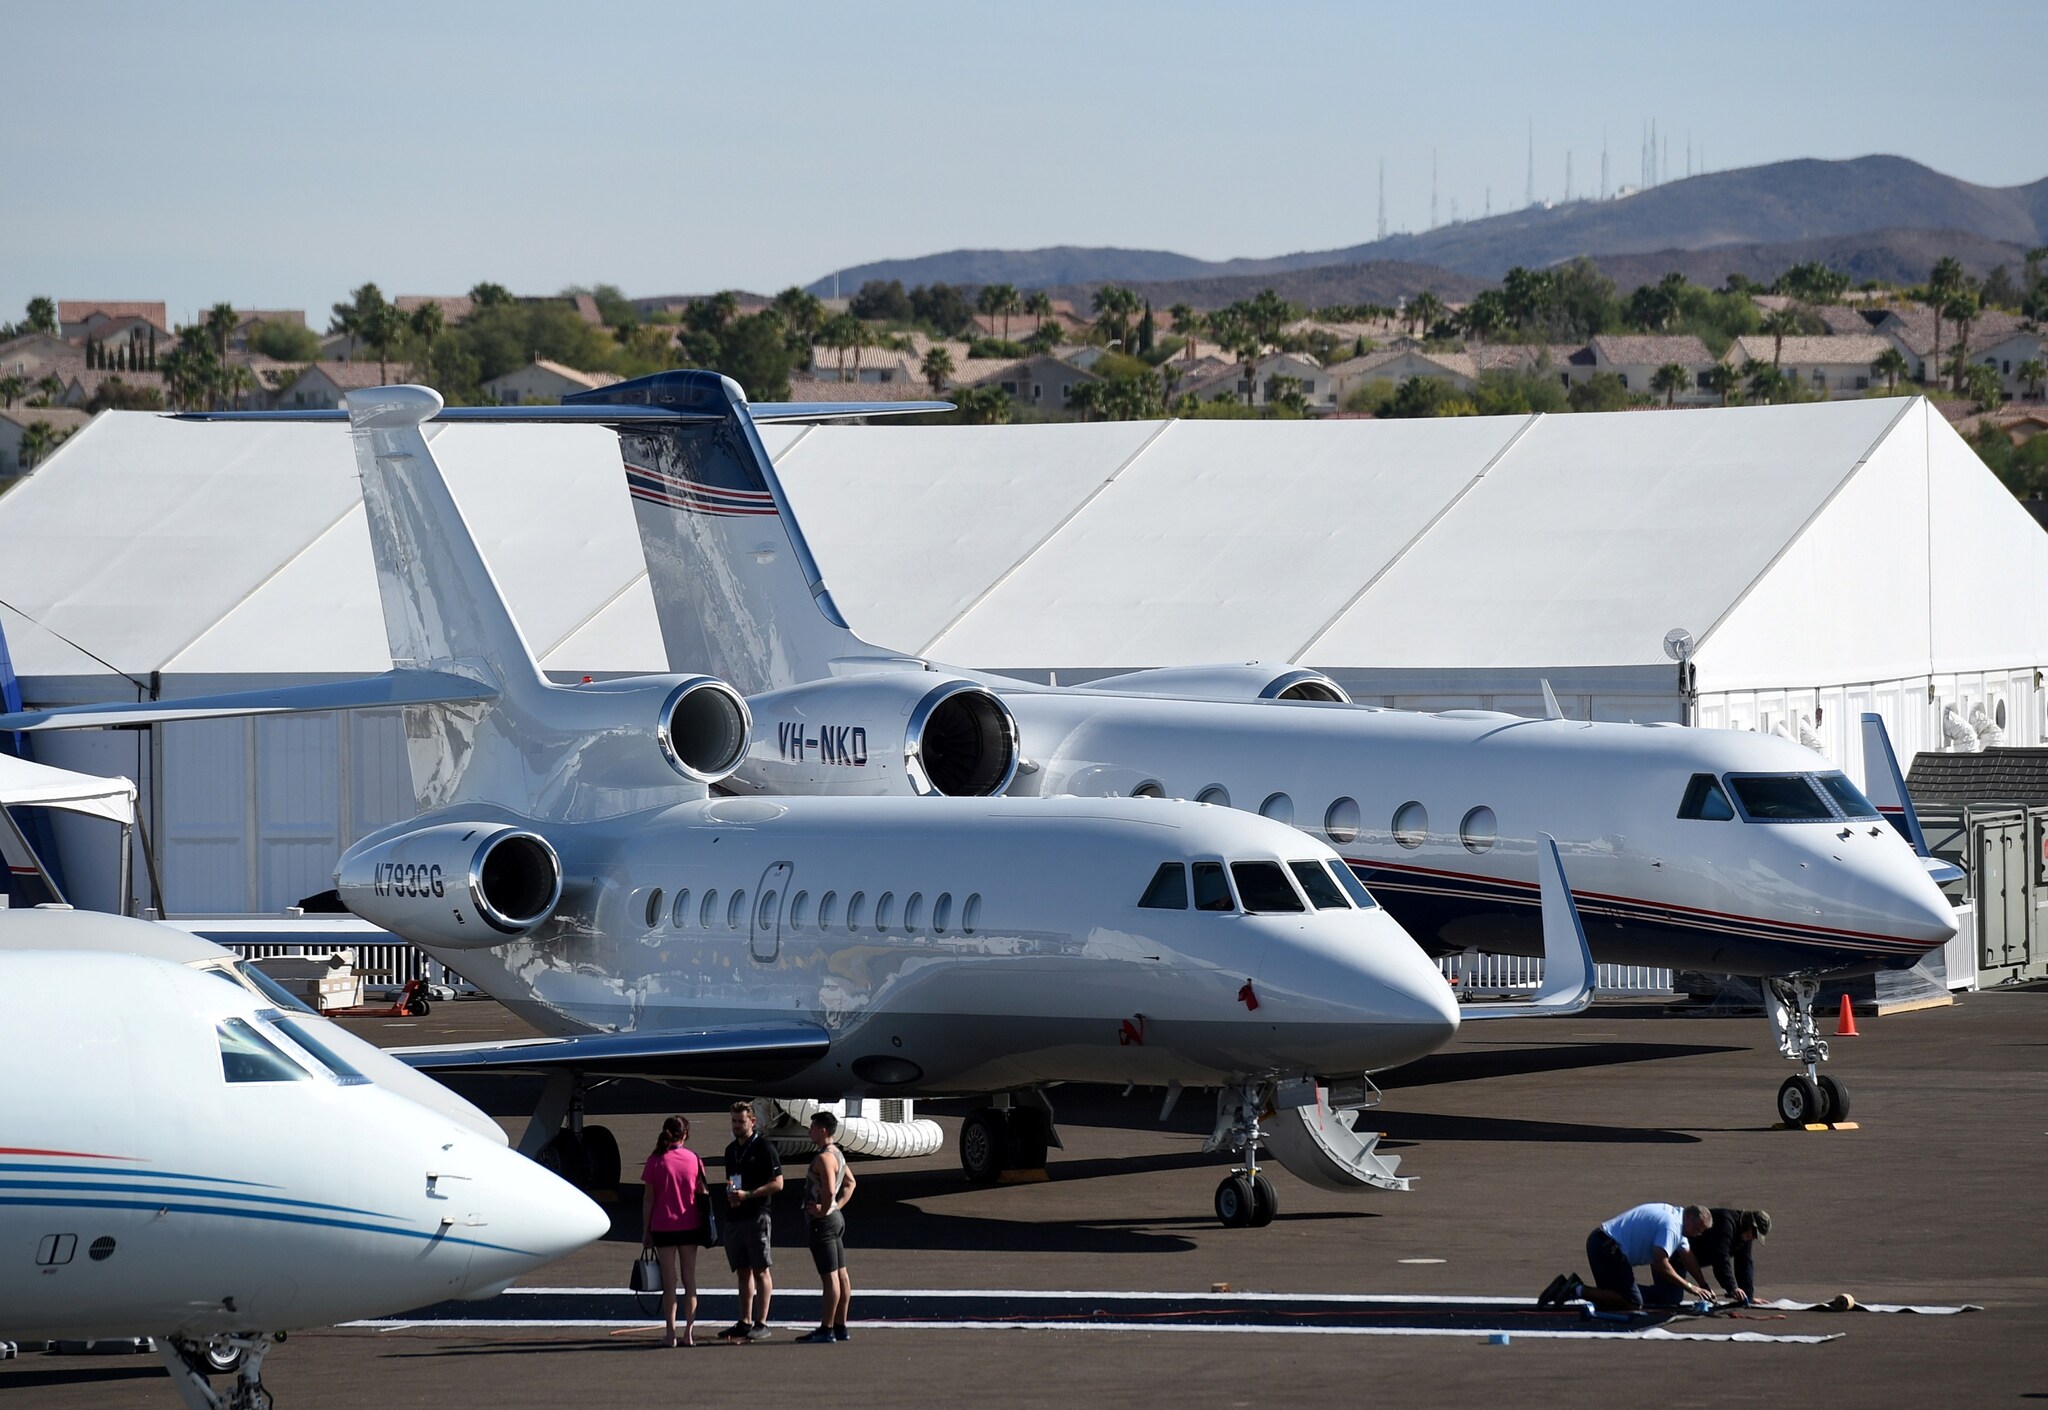 Business jets are seen at the National Business Aviation Association (NBAA) exhibition in Las Vegas, Nevada, U.S. October 21, 2019. REUTERS/David Becker/Files